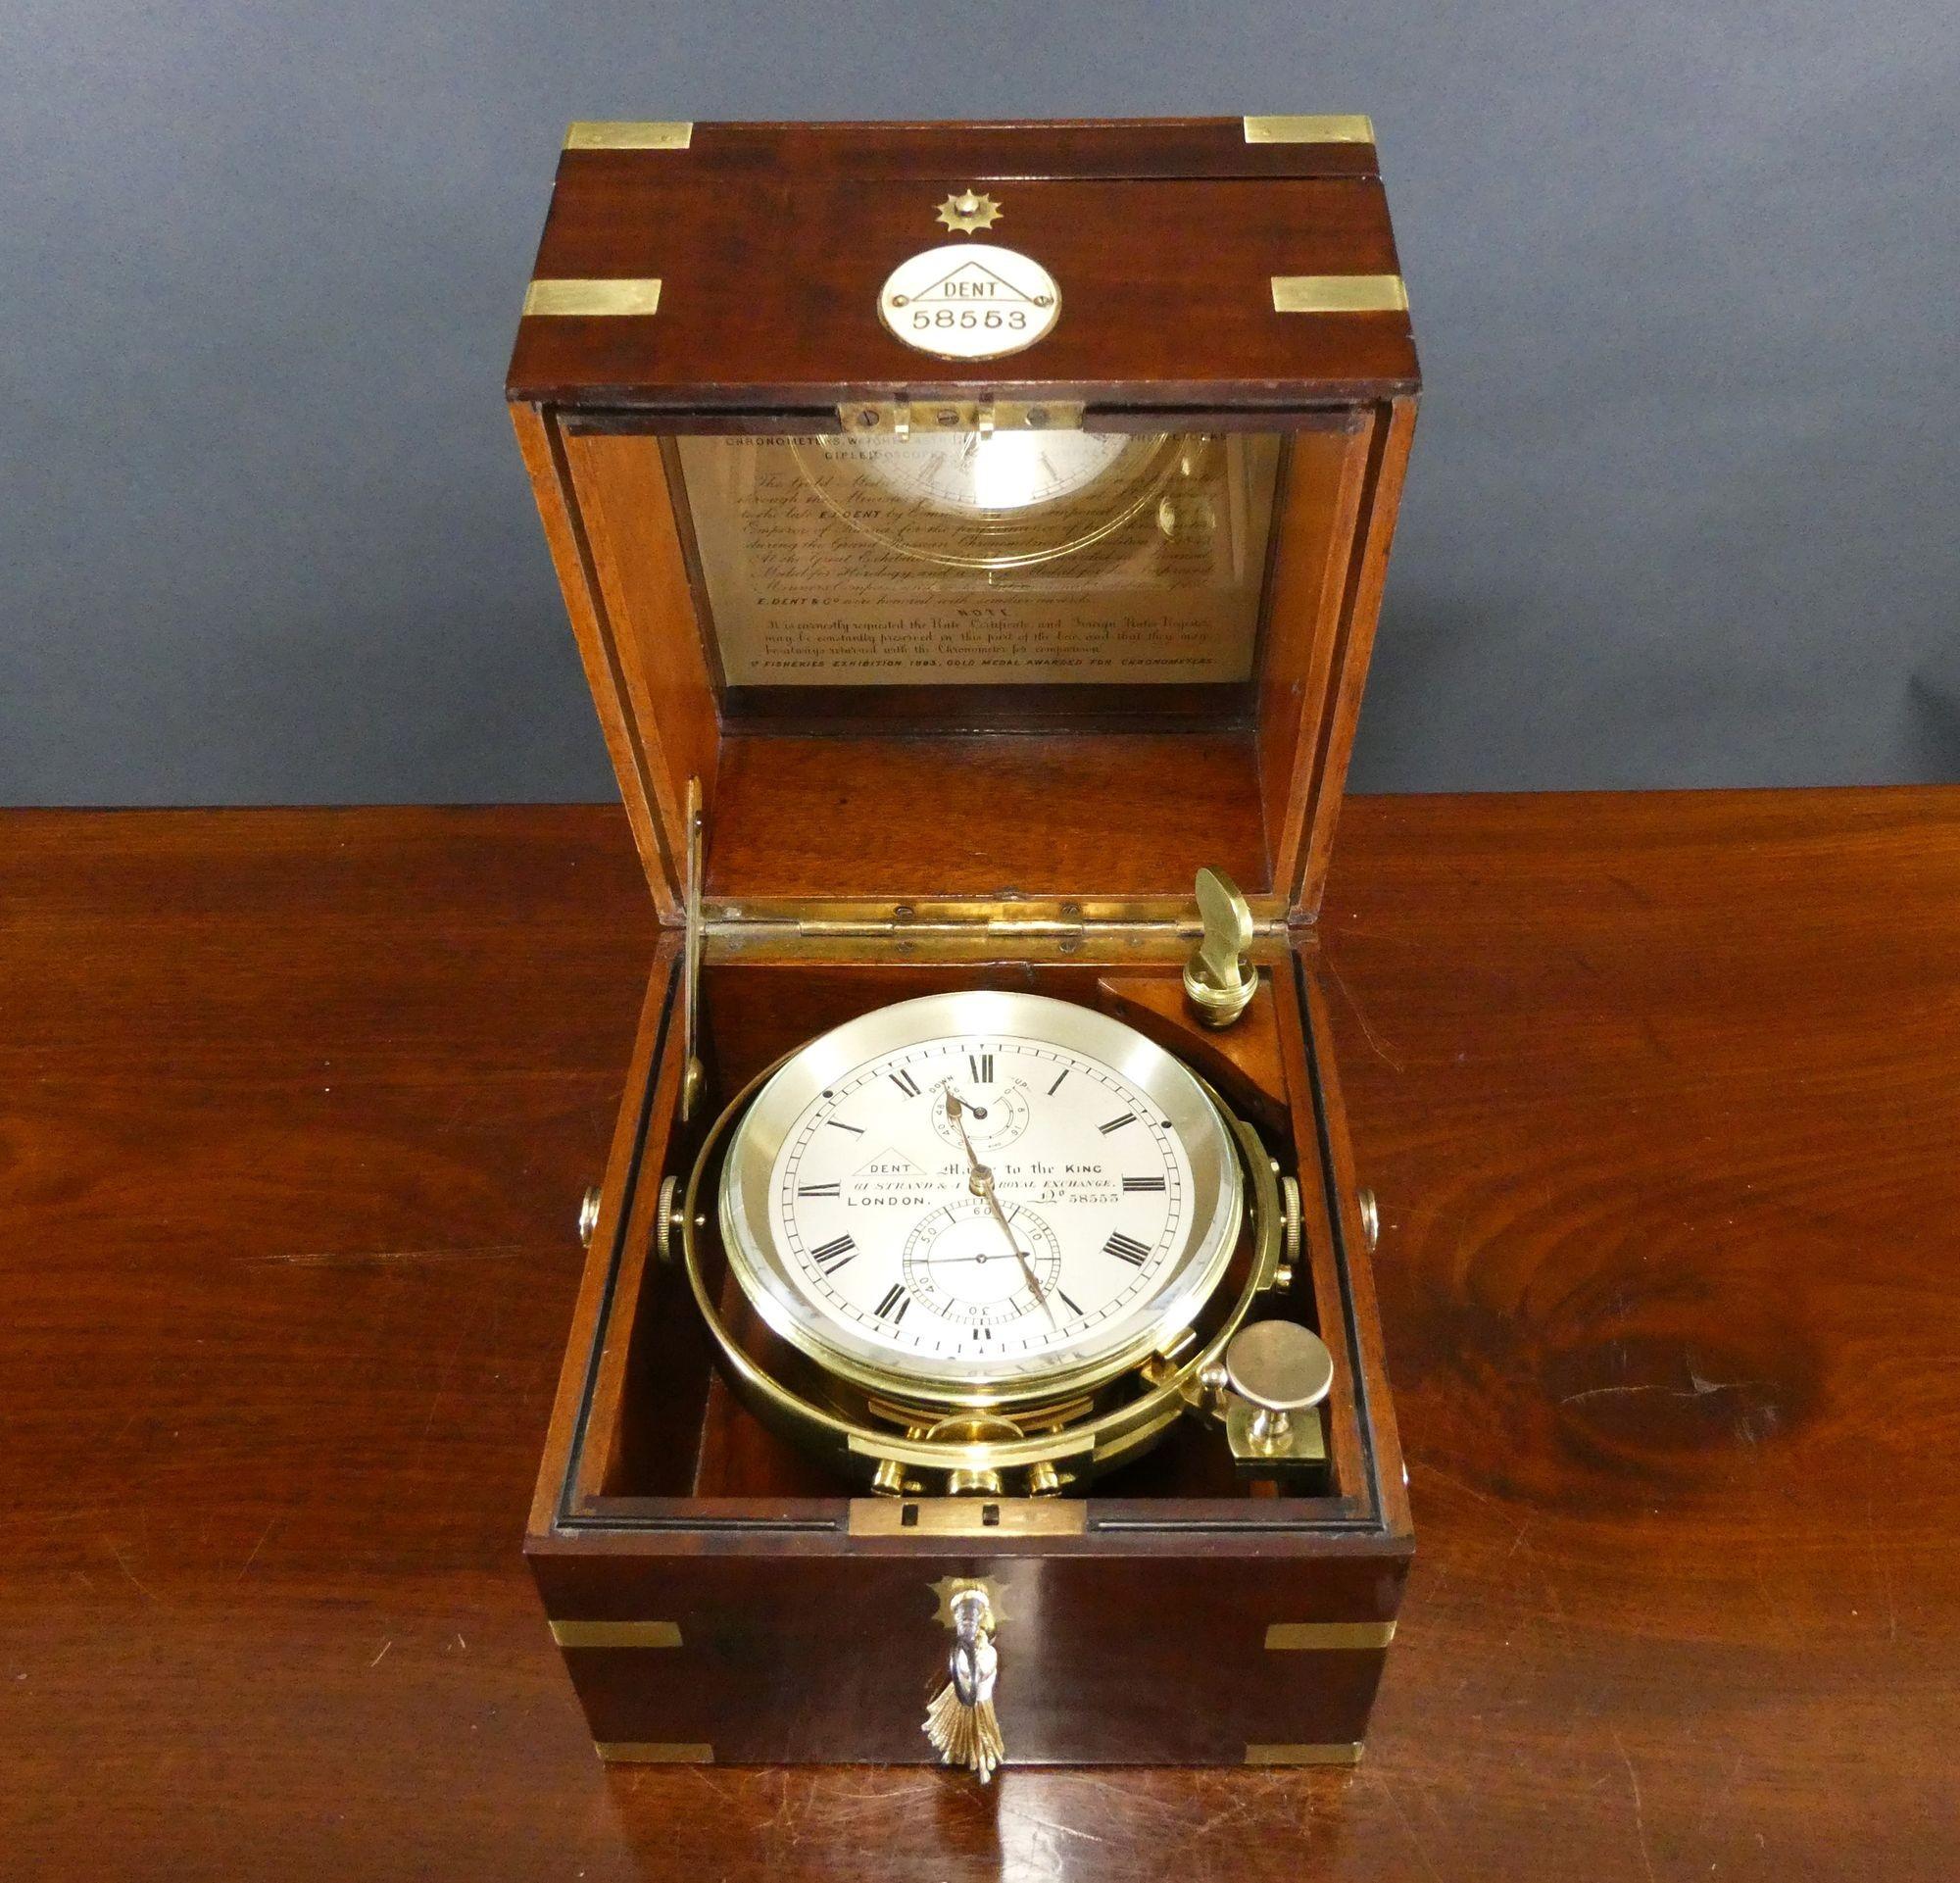 A Fine Two Day Marine Chronometer By Dent, London No.58553

Two day marine chronometer by Dent housed in a beautiful three tier mahogany brass bound box with inset carrying handles to the sides, inset plaque to the front carrying the Dent trademark